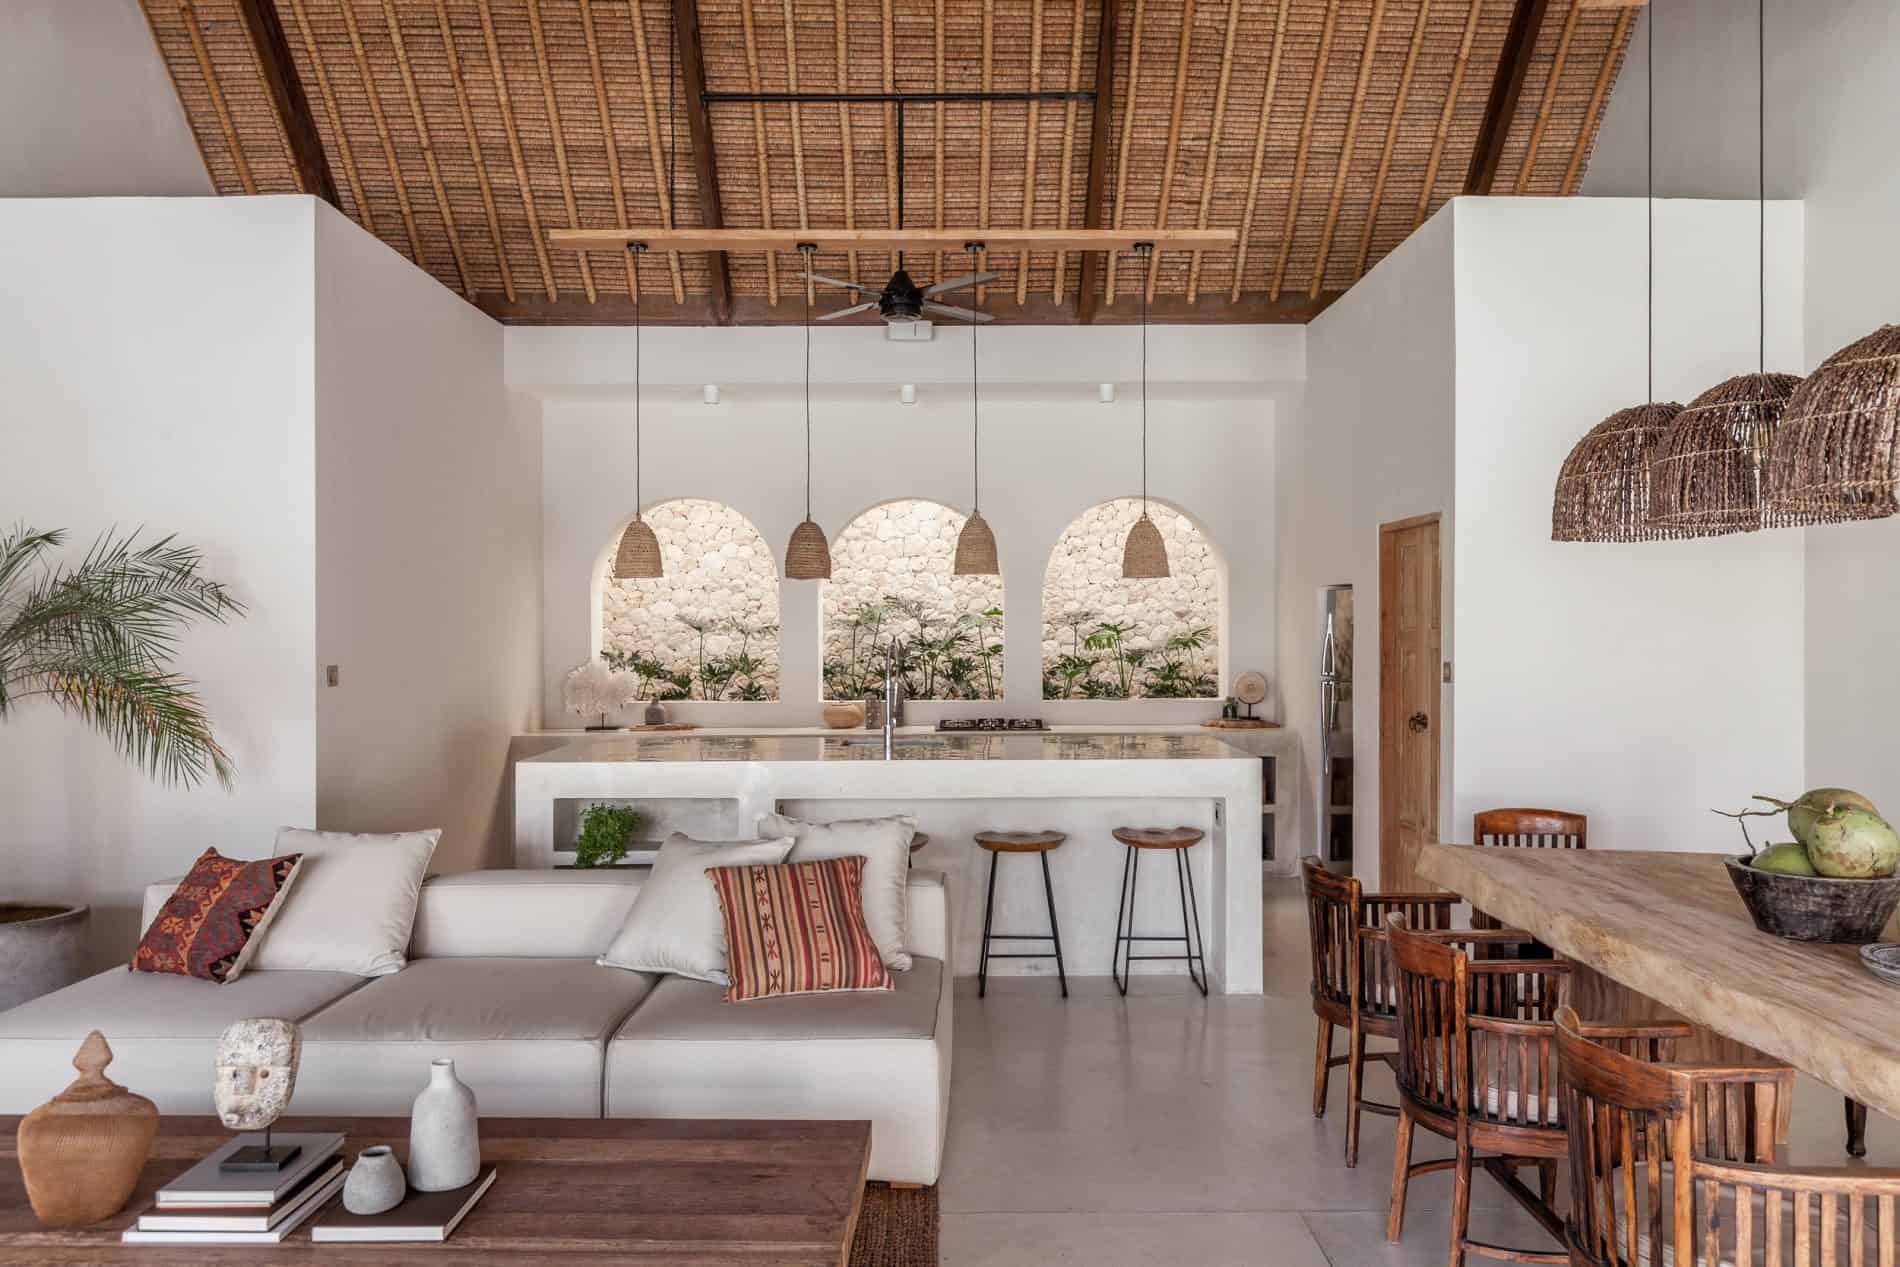 Transform Your Home with Bali Style Furniture